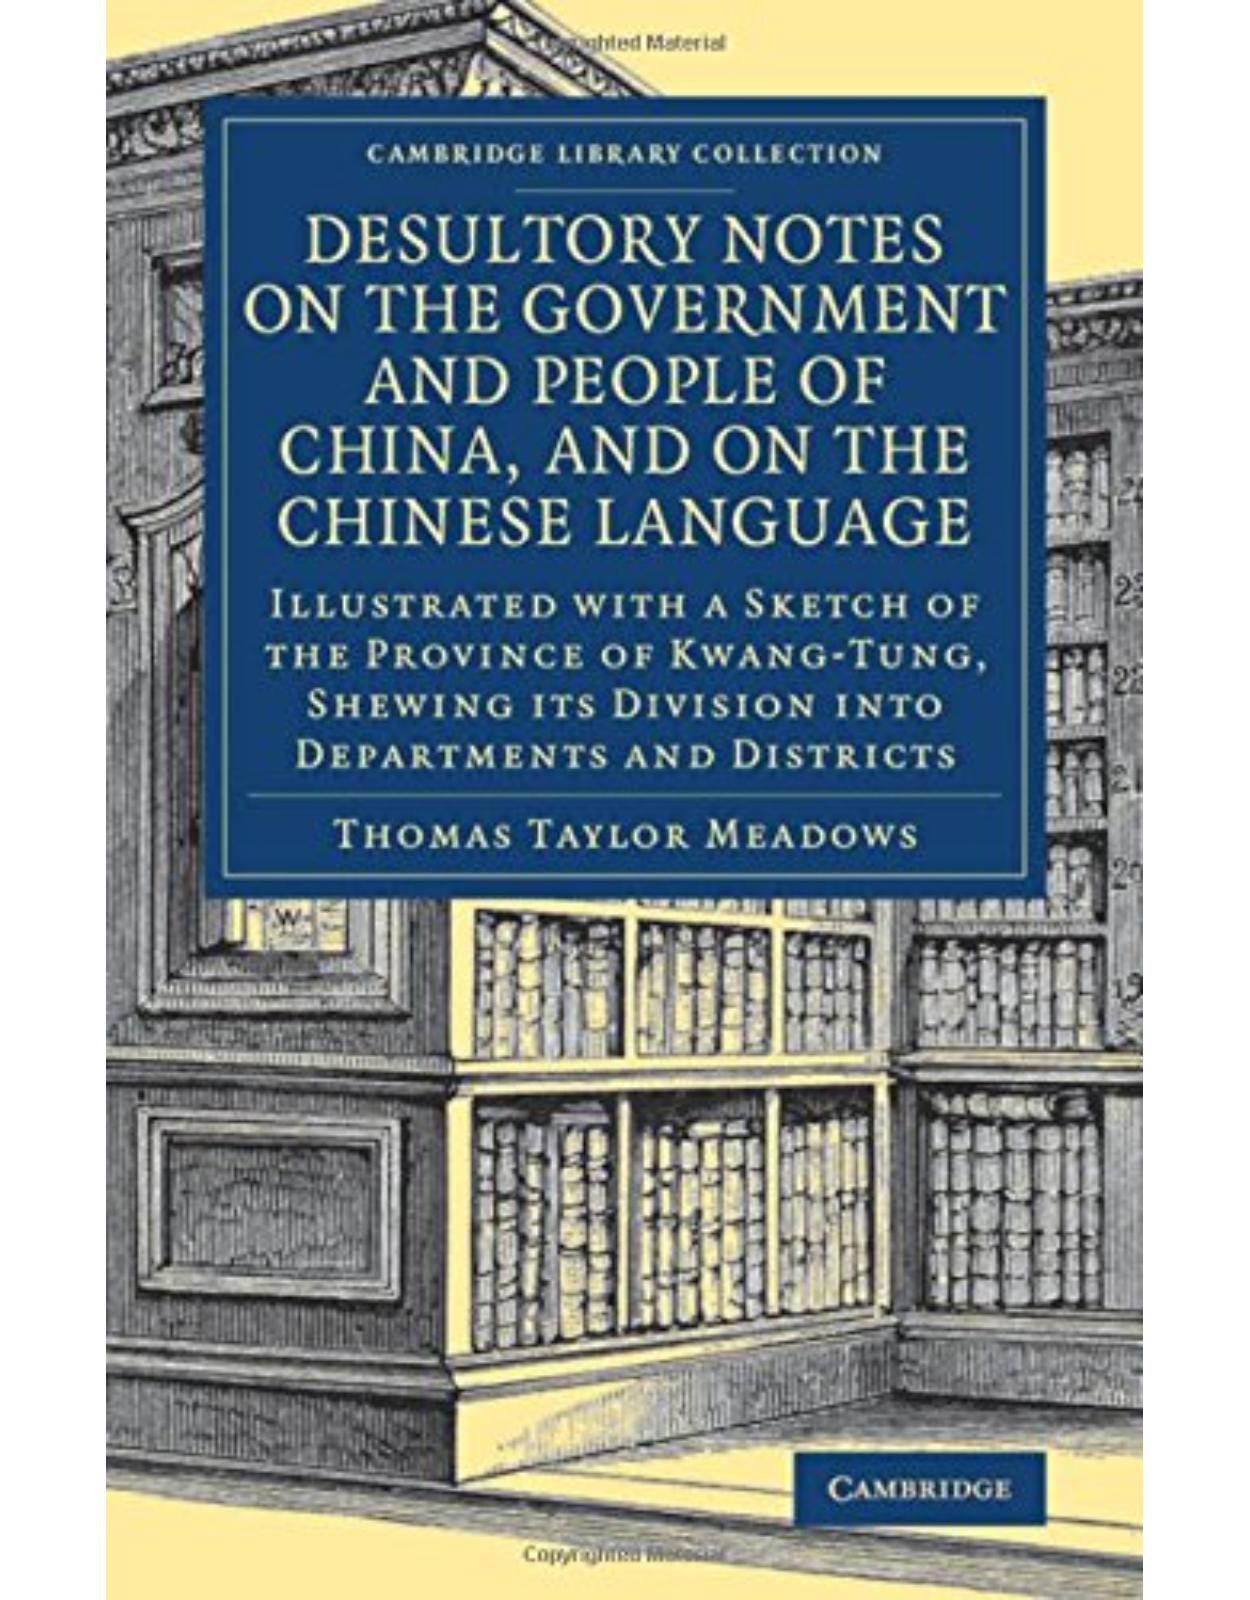 Desultory Notes on the Government and People of China, and on the Chinese Language: Illustrated with a Sketch of the Province of Kwang-Tung, Shewing ... - East and South-East Asian History)